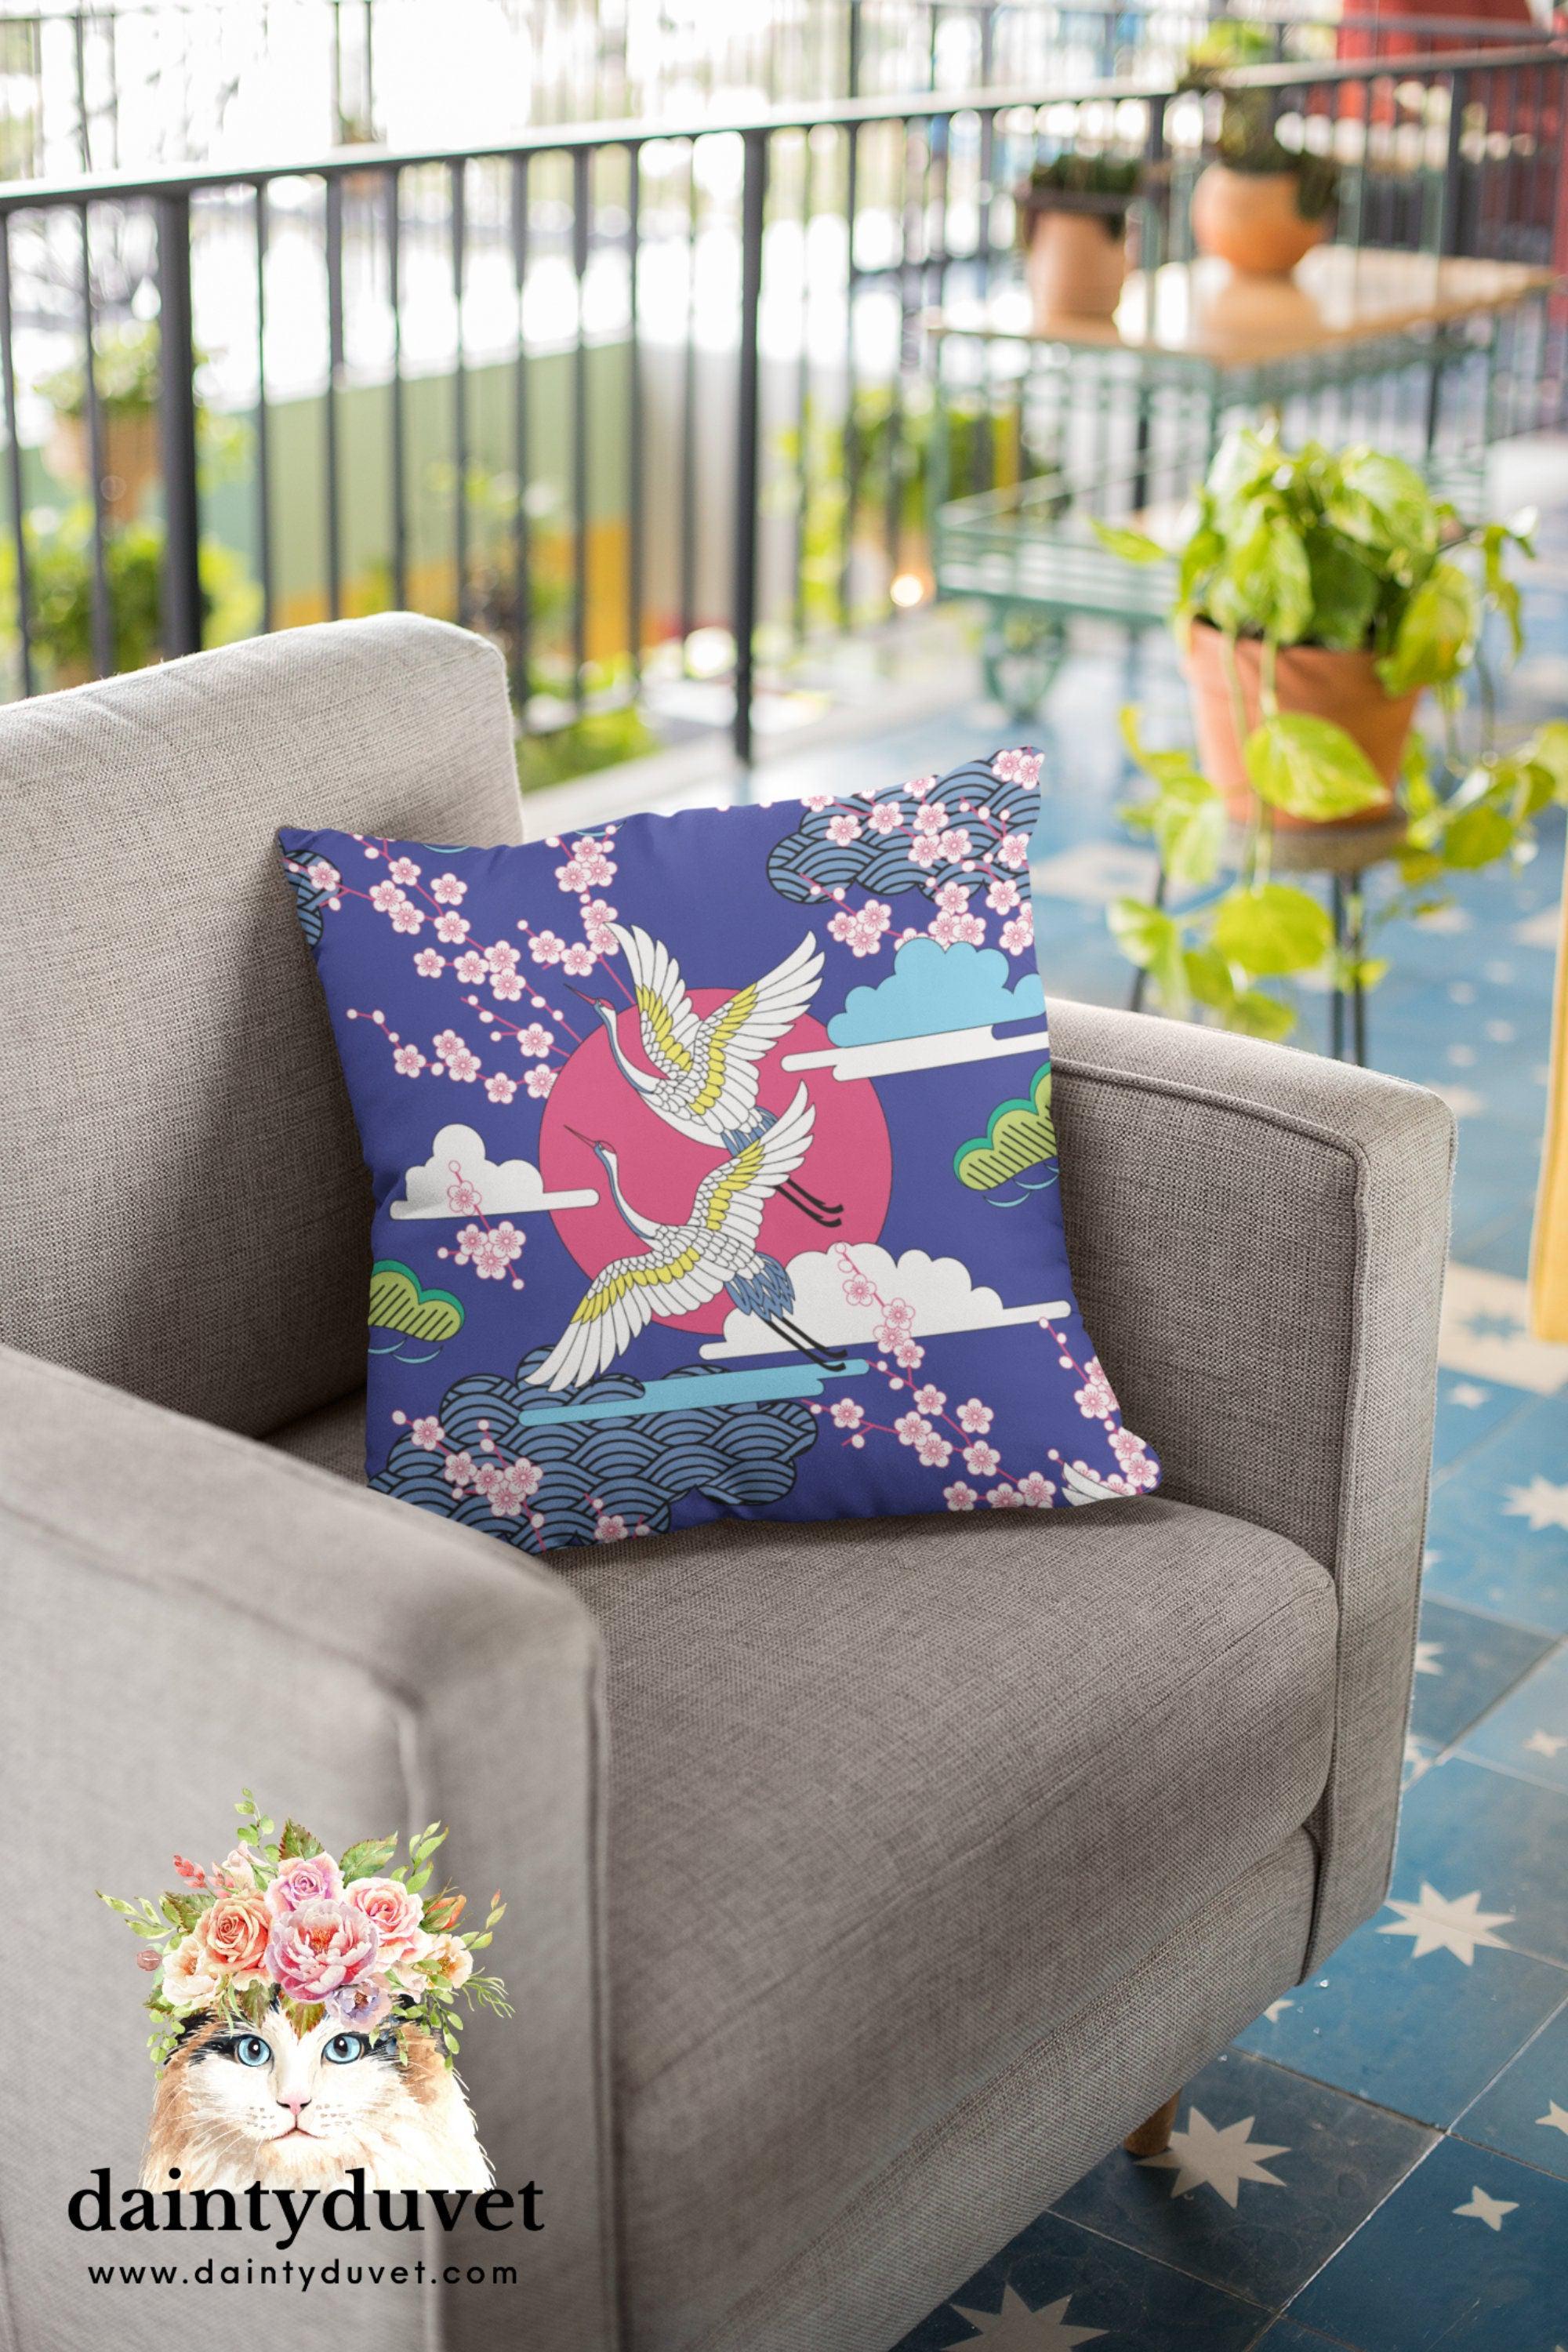 daintyduvet Blue Oriental Pillowcase with Crane and Cherry Blossoms Prints, Japanese Fabric Chair Cushion Cover, Japanese Decor Square Pillow Cover